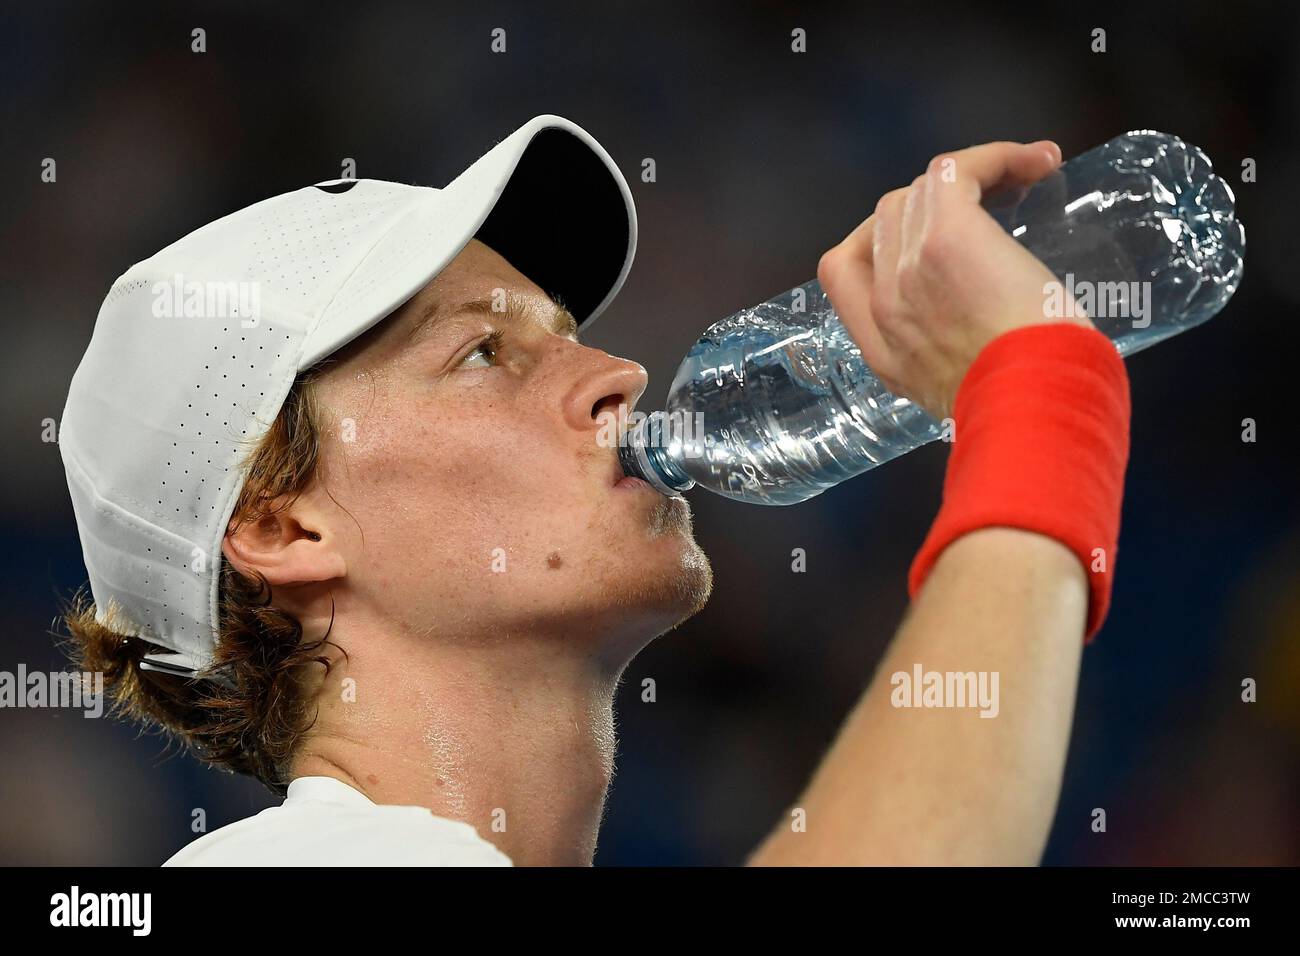 Jannik Sinner of Italy takes a drink during his quarterfinal match against  Stefanos Tsitsipas of Greece at the Australian Open tennis championships in  Melbourne, Australia, Wednesday, Jan. 26, 2022. (AP Photo/Andy Brownbill